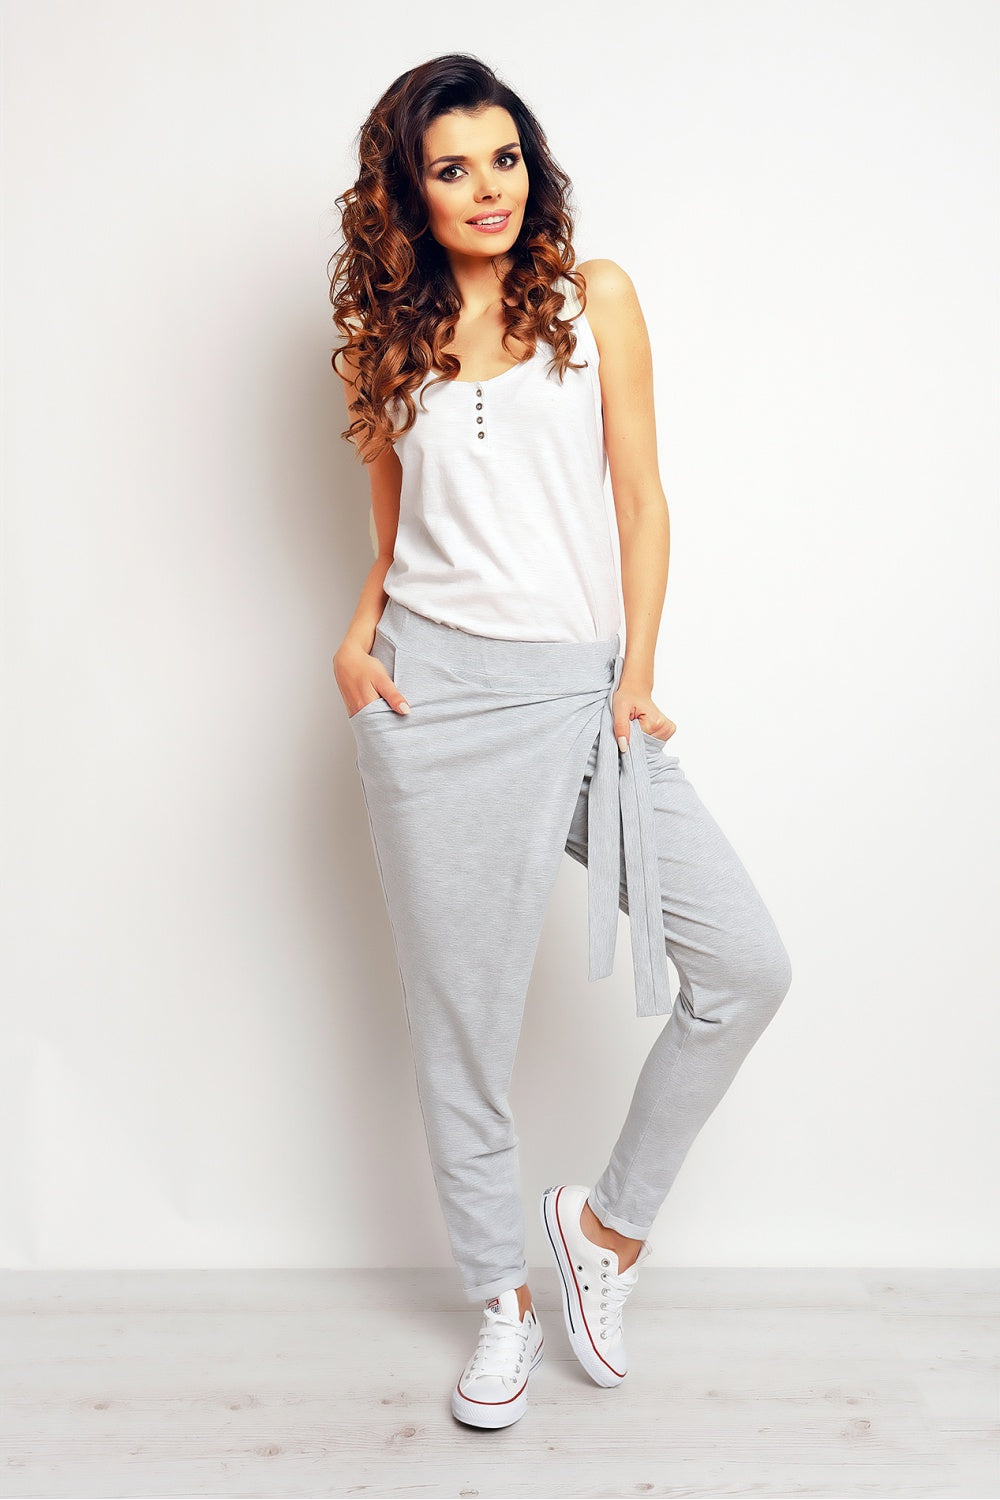 Tracksuit trousers model 61245 Elsy Style Women`s Tracksuit Bottoms, Sports Pants